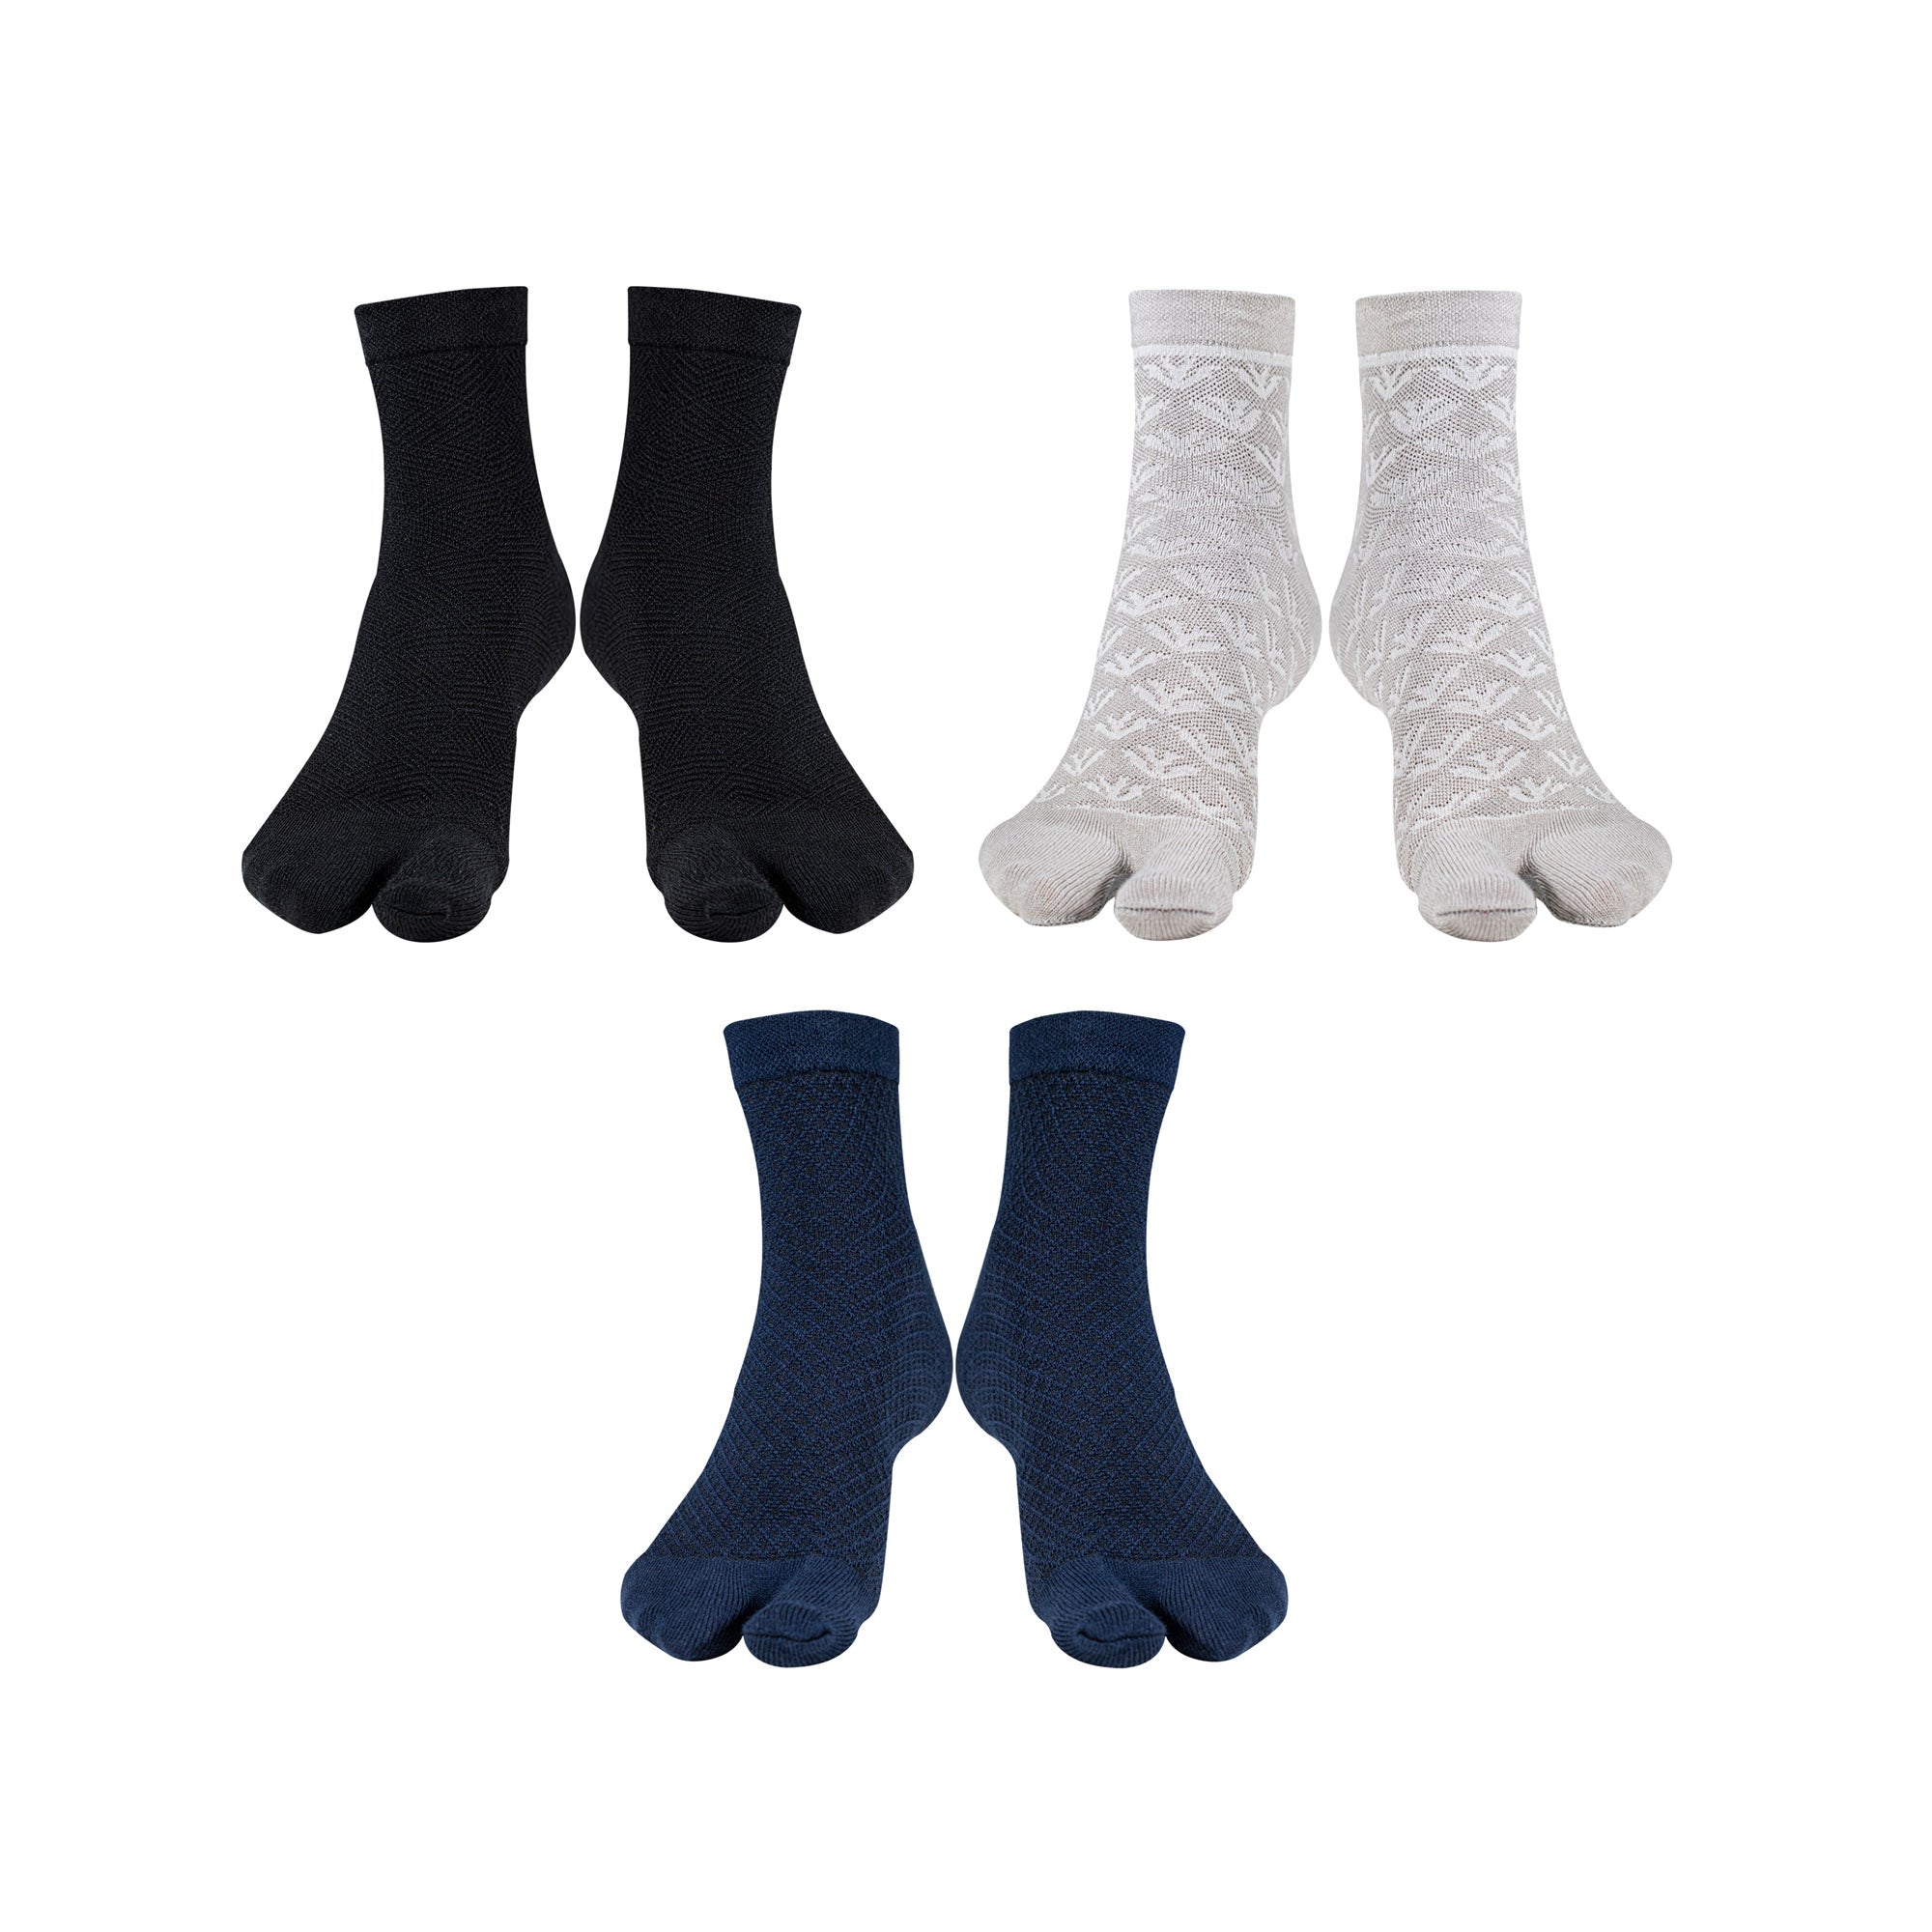 Young Wings Antibacterial Womens Cotton Thumb Ankle Socks WS1004 - Pack of 3